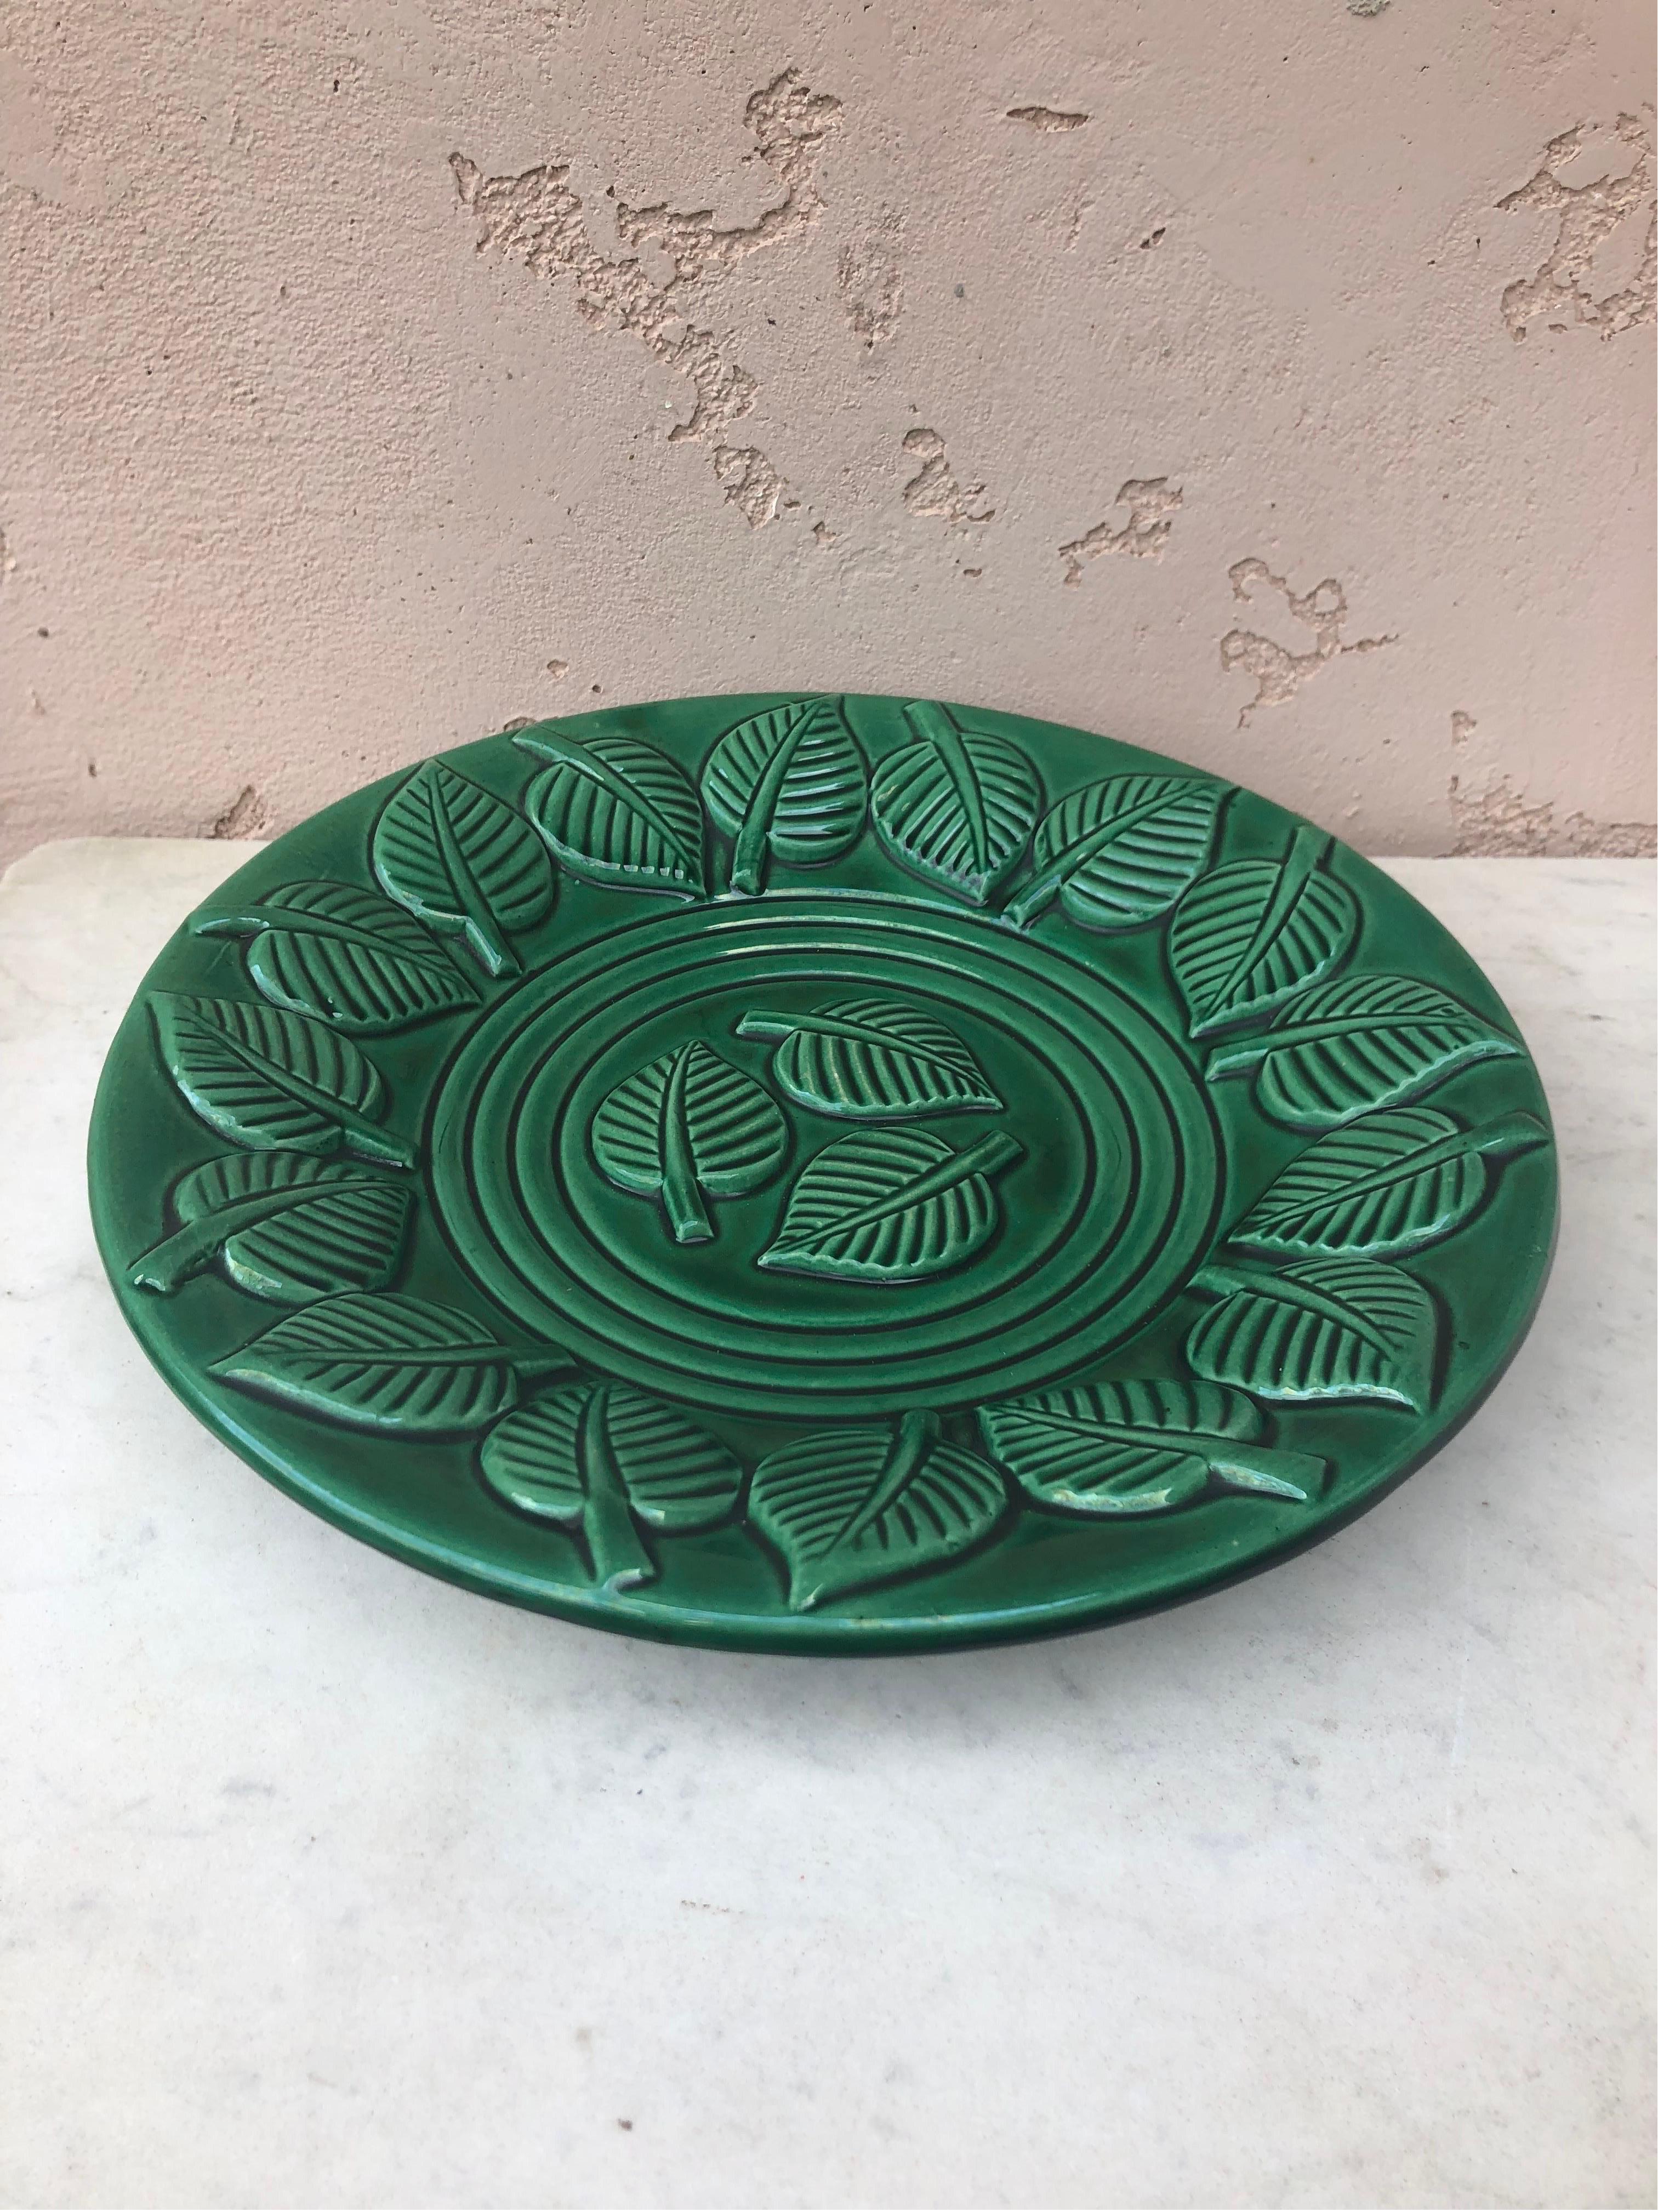 Large green majolica platter or bowl with leaves signed B-Letalle Saint Clement Circa 1950.